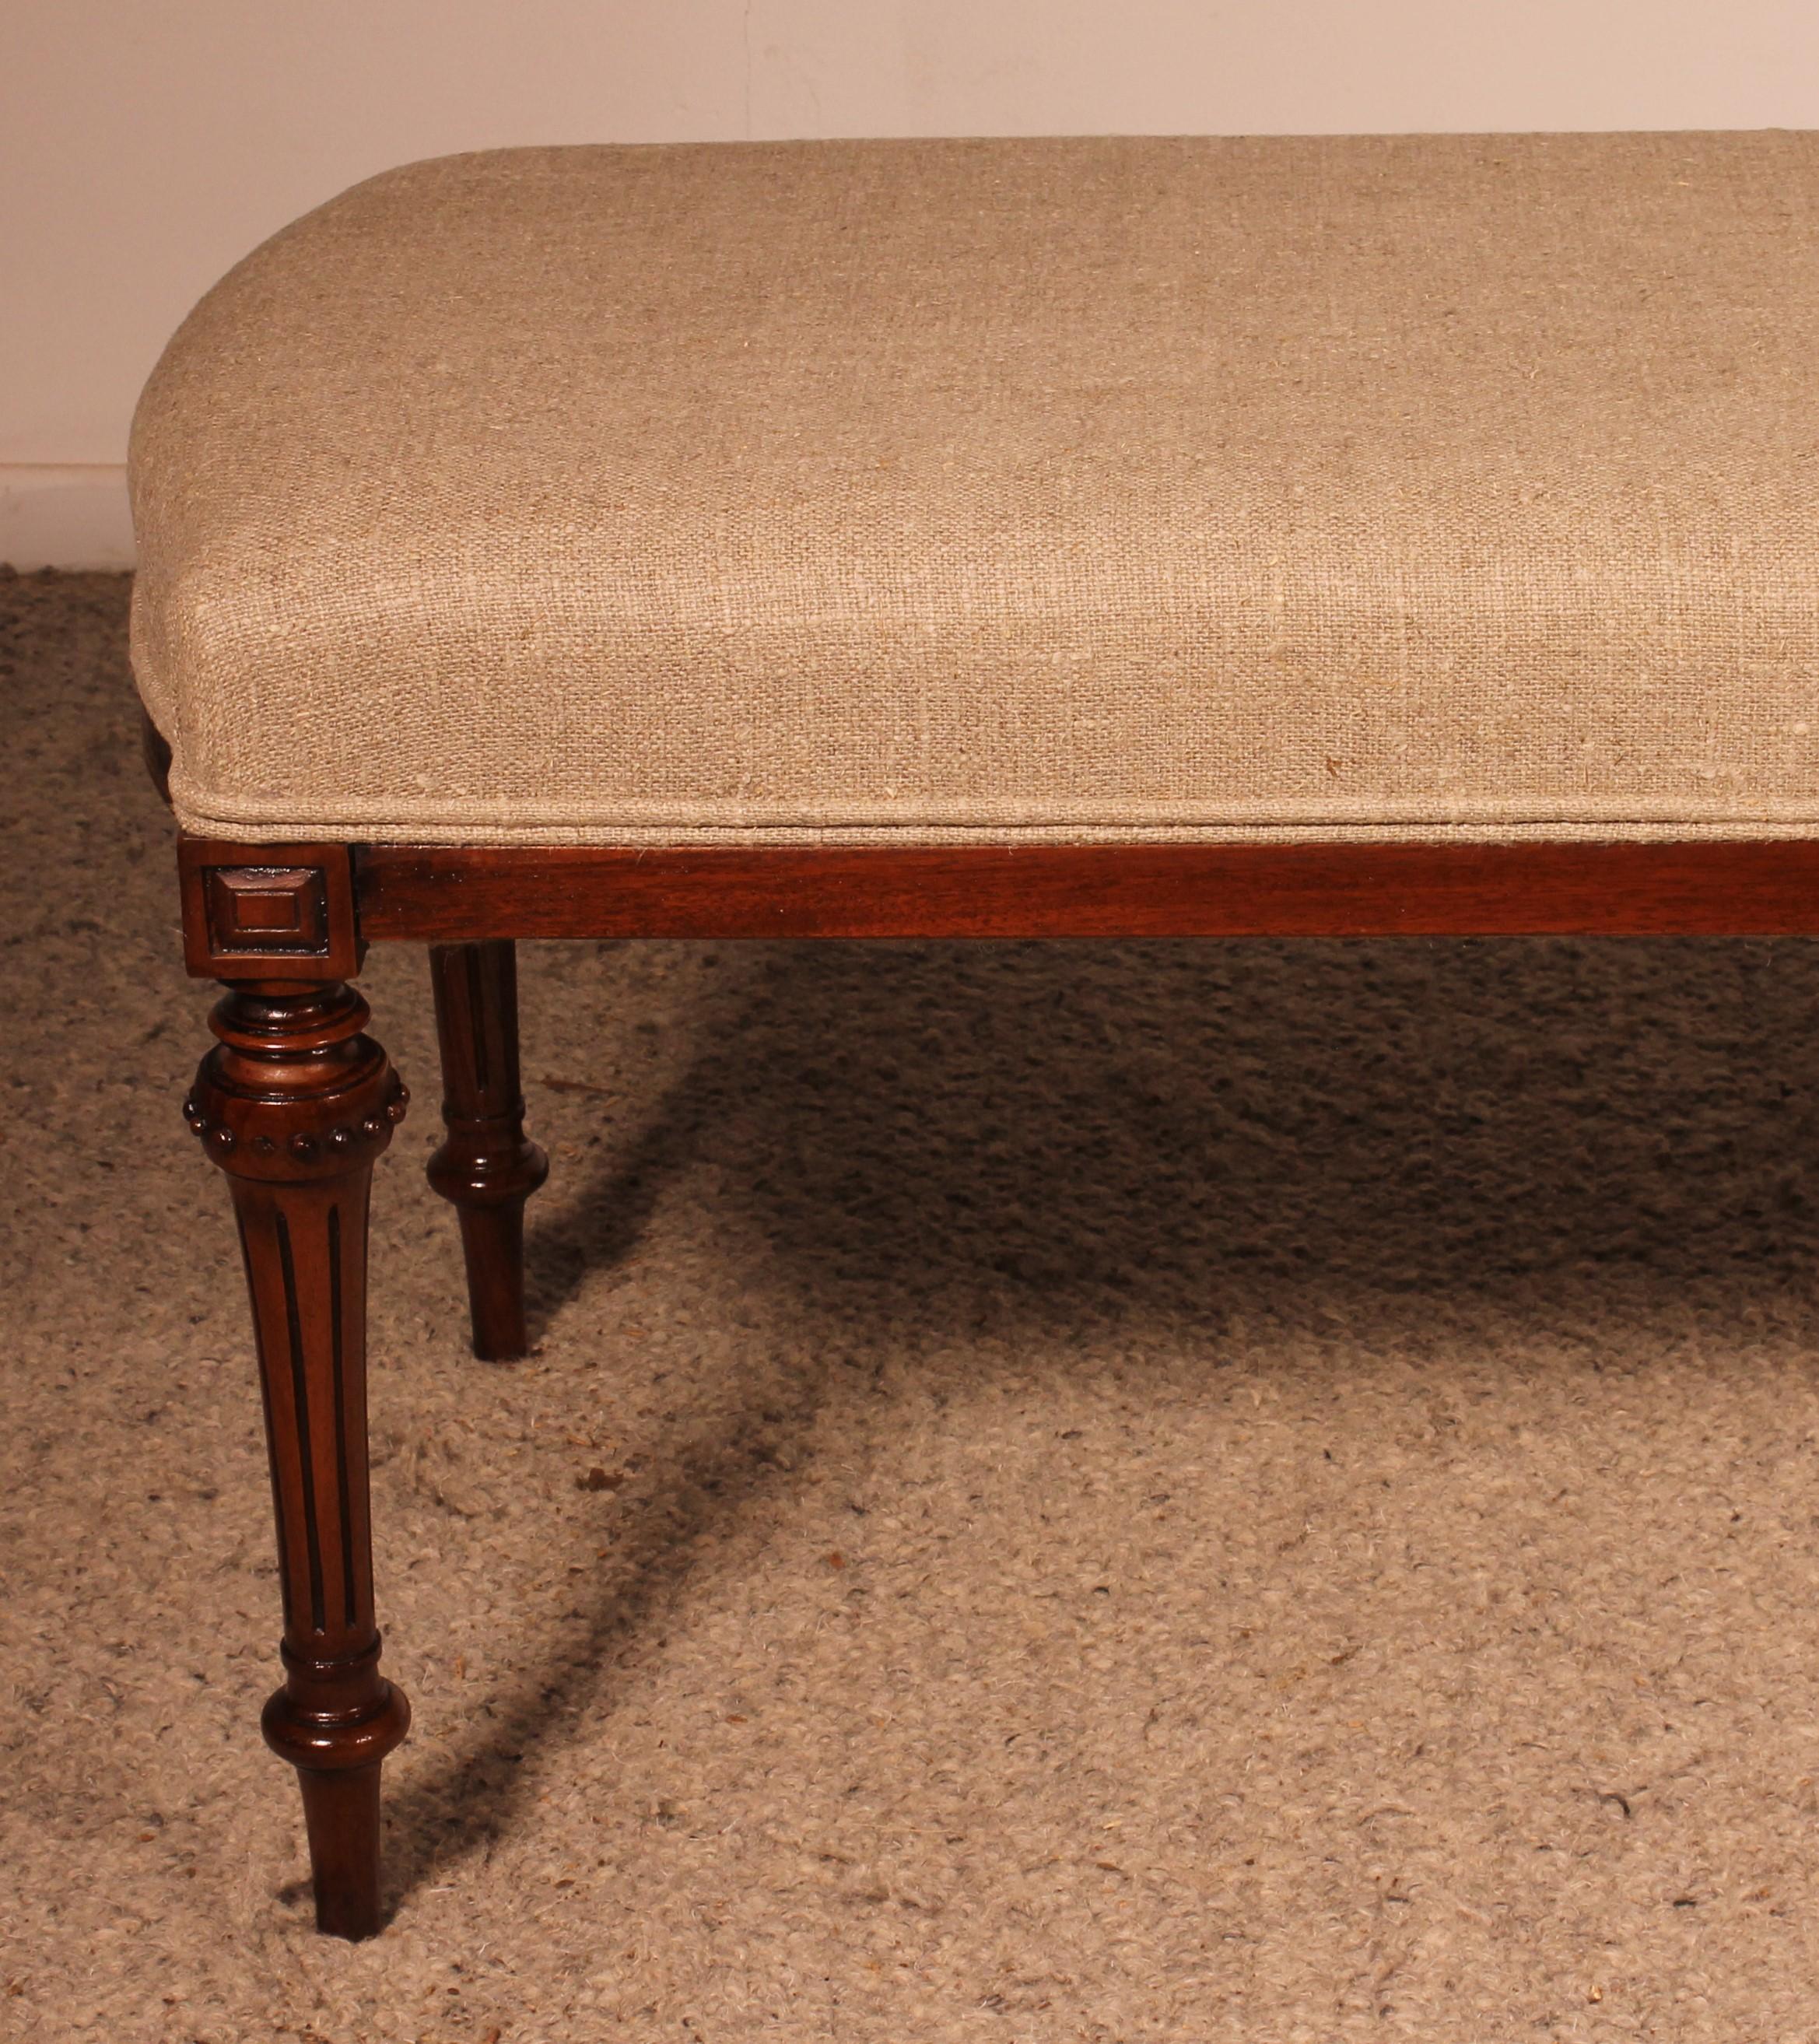 Victorian Mahogany Bench From The 19th Century Covered With A Linen Fabric